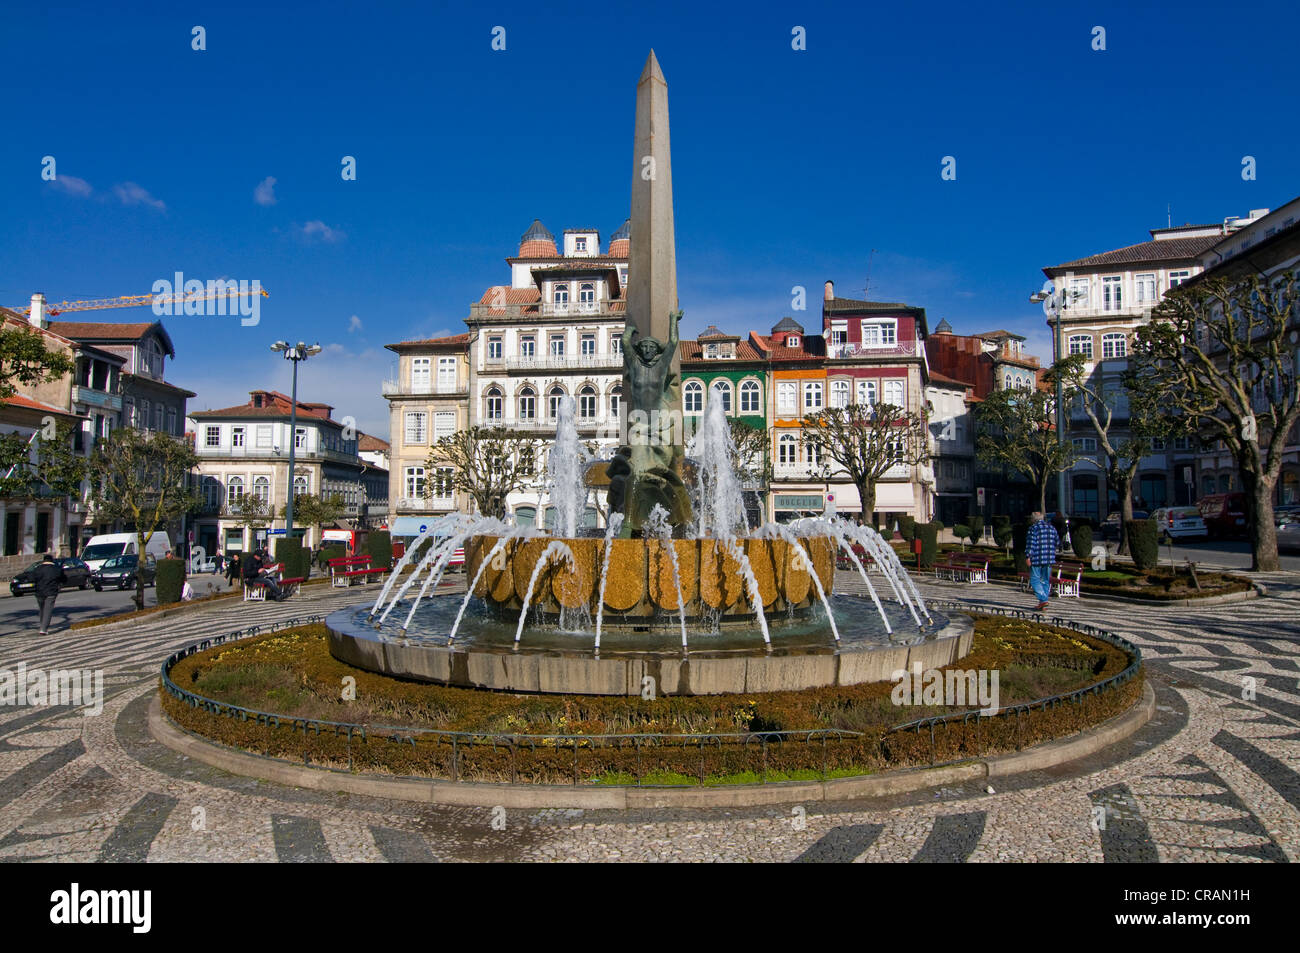 Fountain on the Lago de Toural square in the old town, UNESCO Word Heritage Site, Guimarães, Portugal, Europe Stock Photo